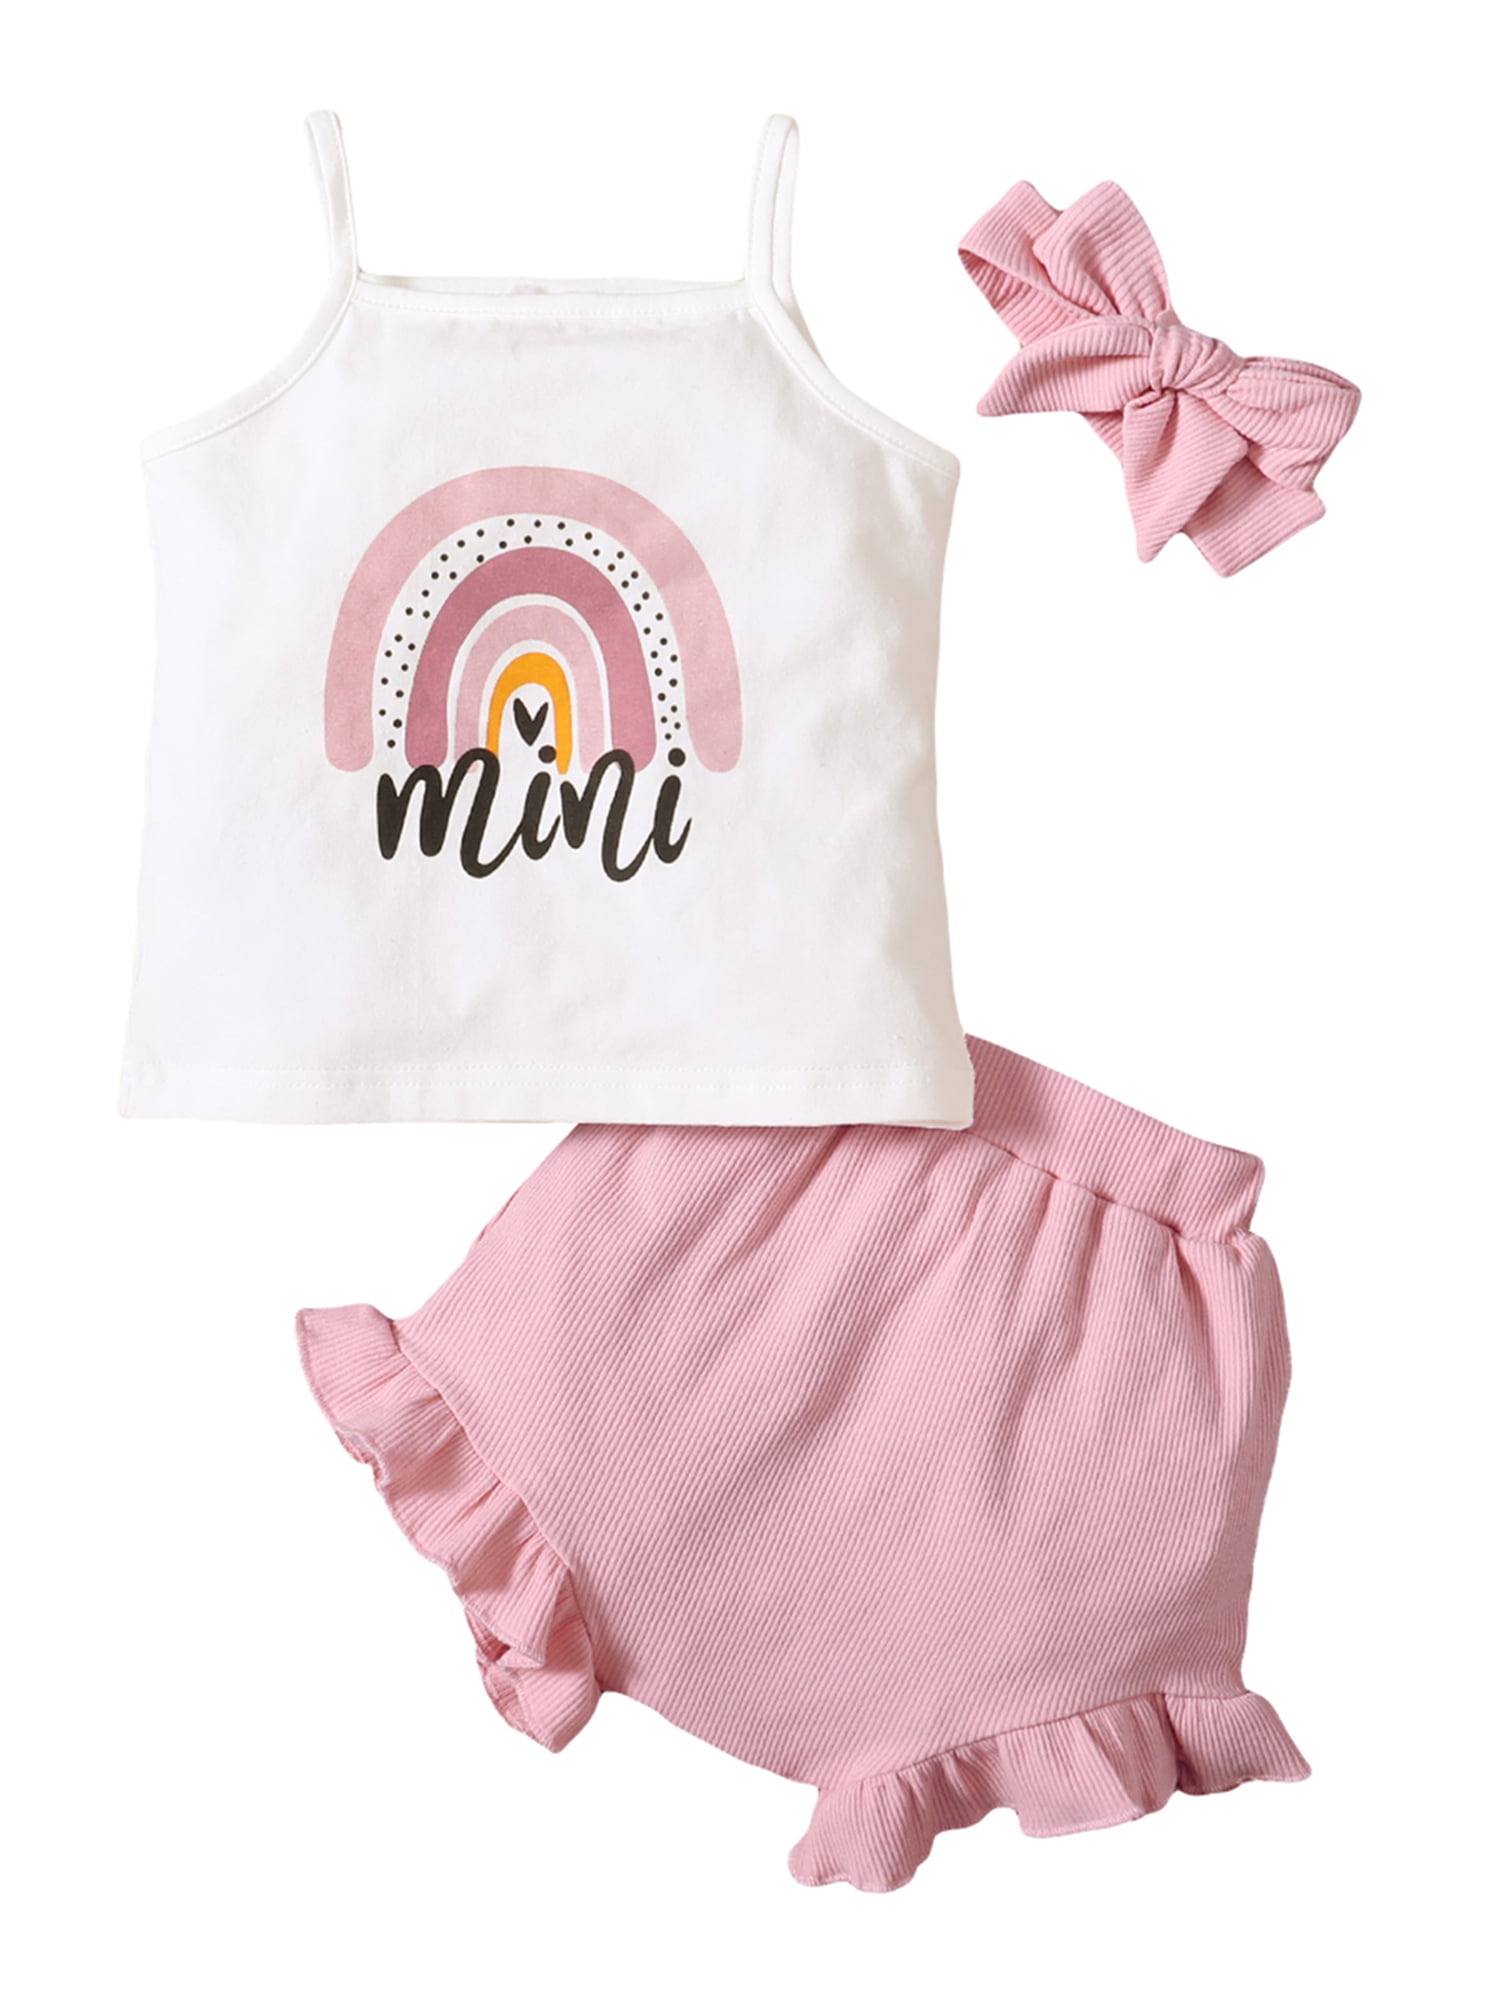 Details about   Newborn Infant Baby Girl Sleeveless Vest Tops Shorts Set Summer Clothes Outfits